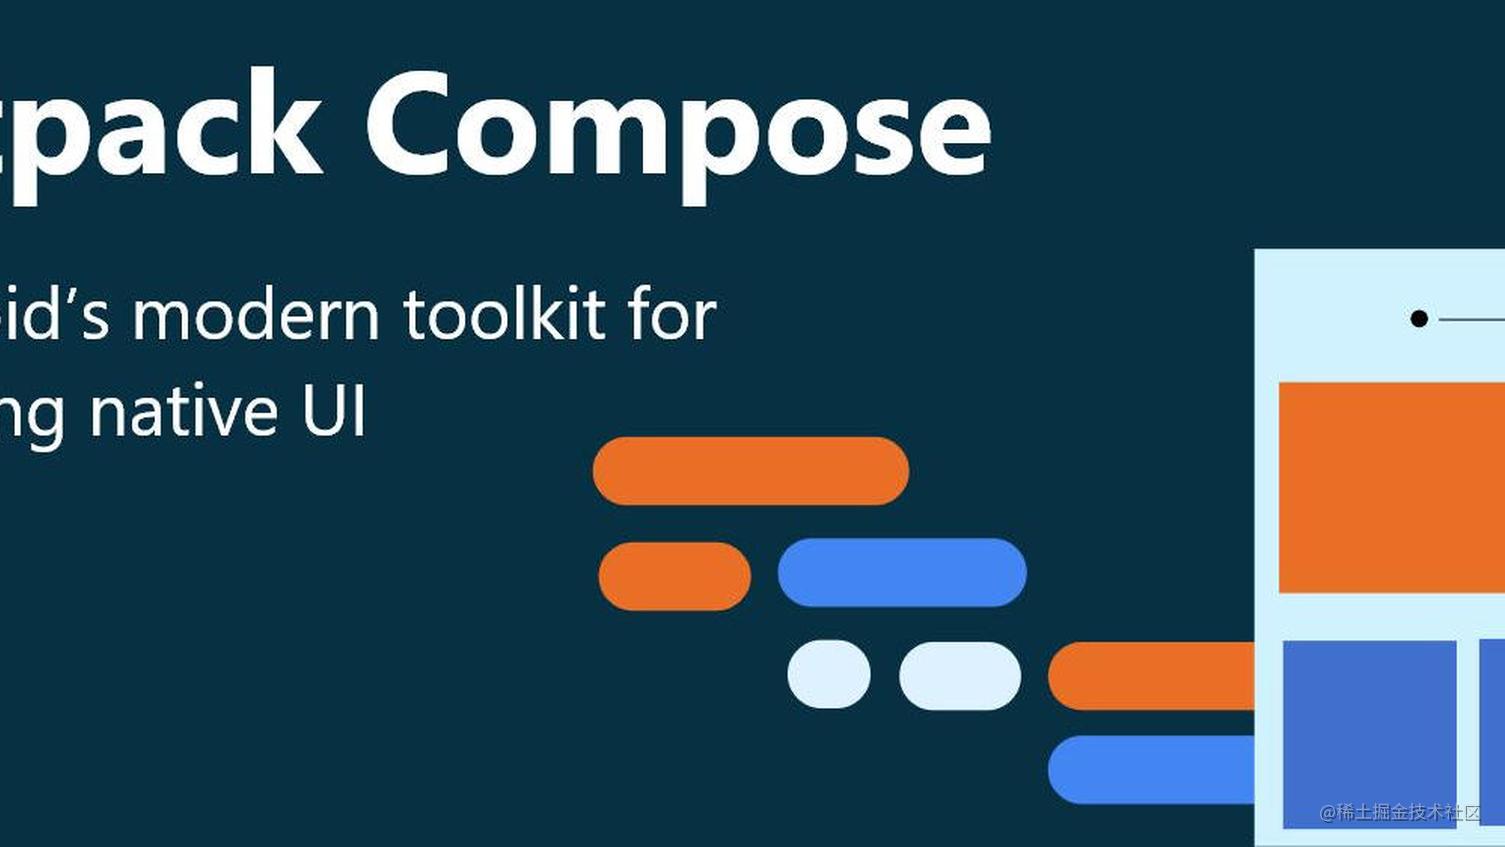 Android 利用Jetpack Compose +Paging3+swiperefresh实现分页加载，下拉上拉效果